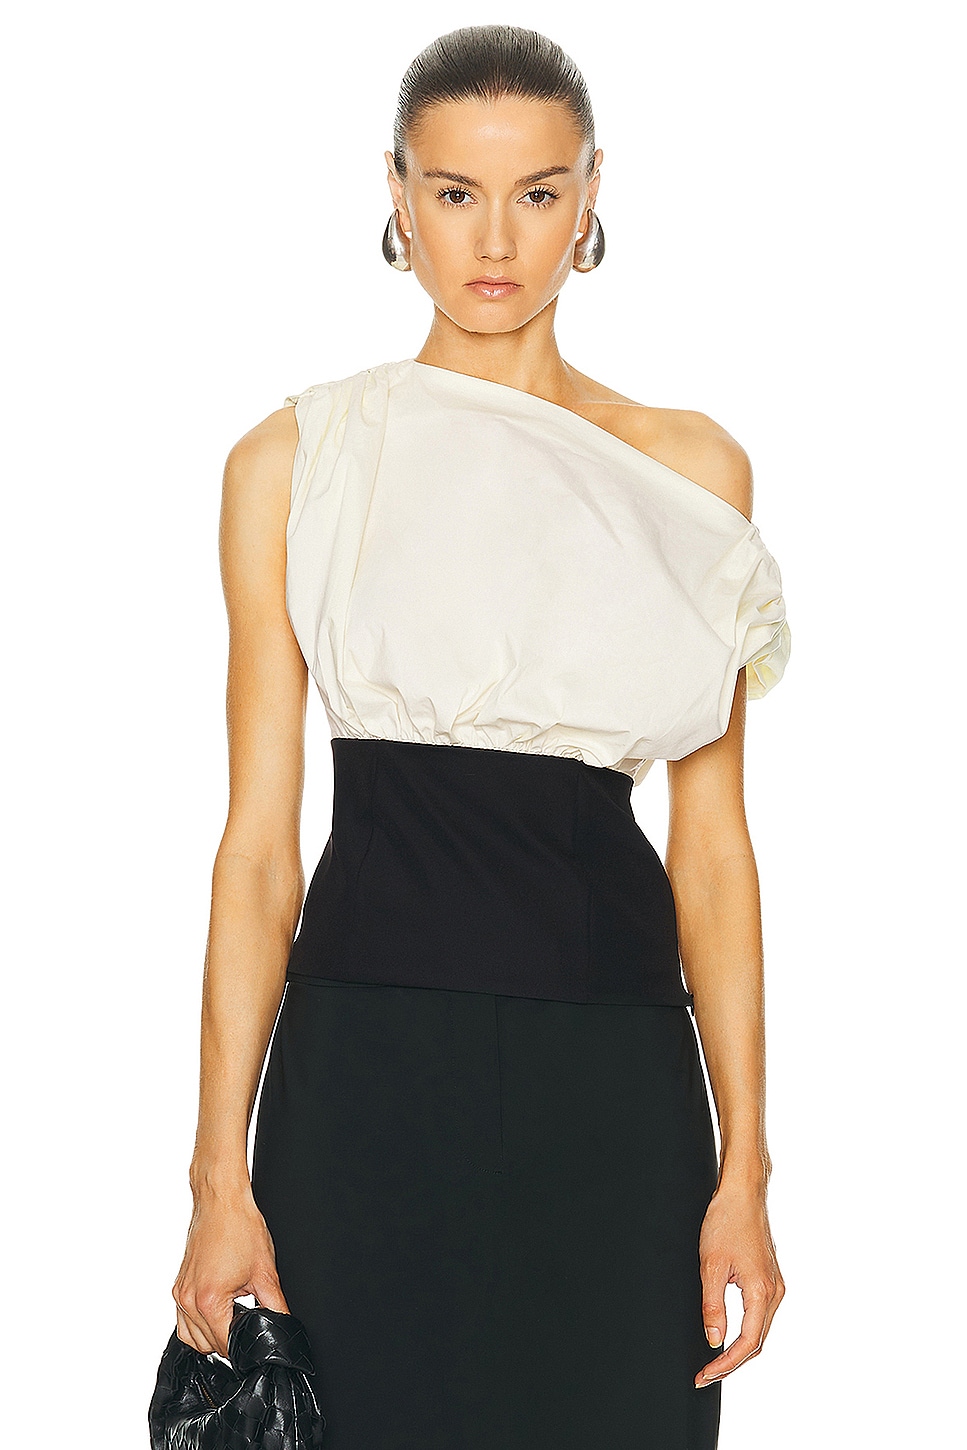 Image 1 of L'Academie by Marianna Matteah Top in Black & Ivory